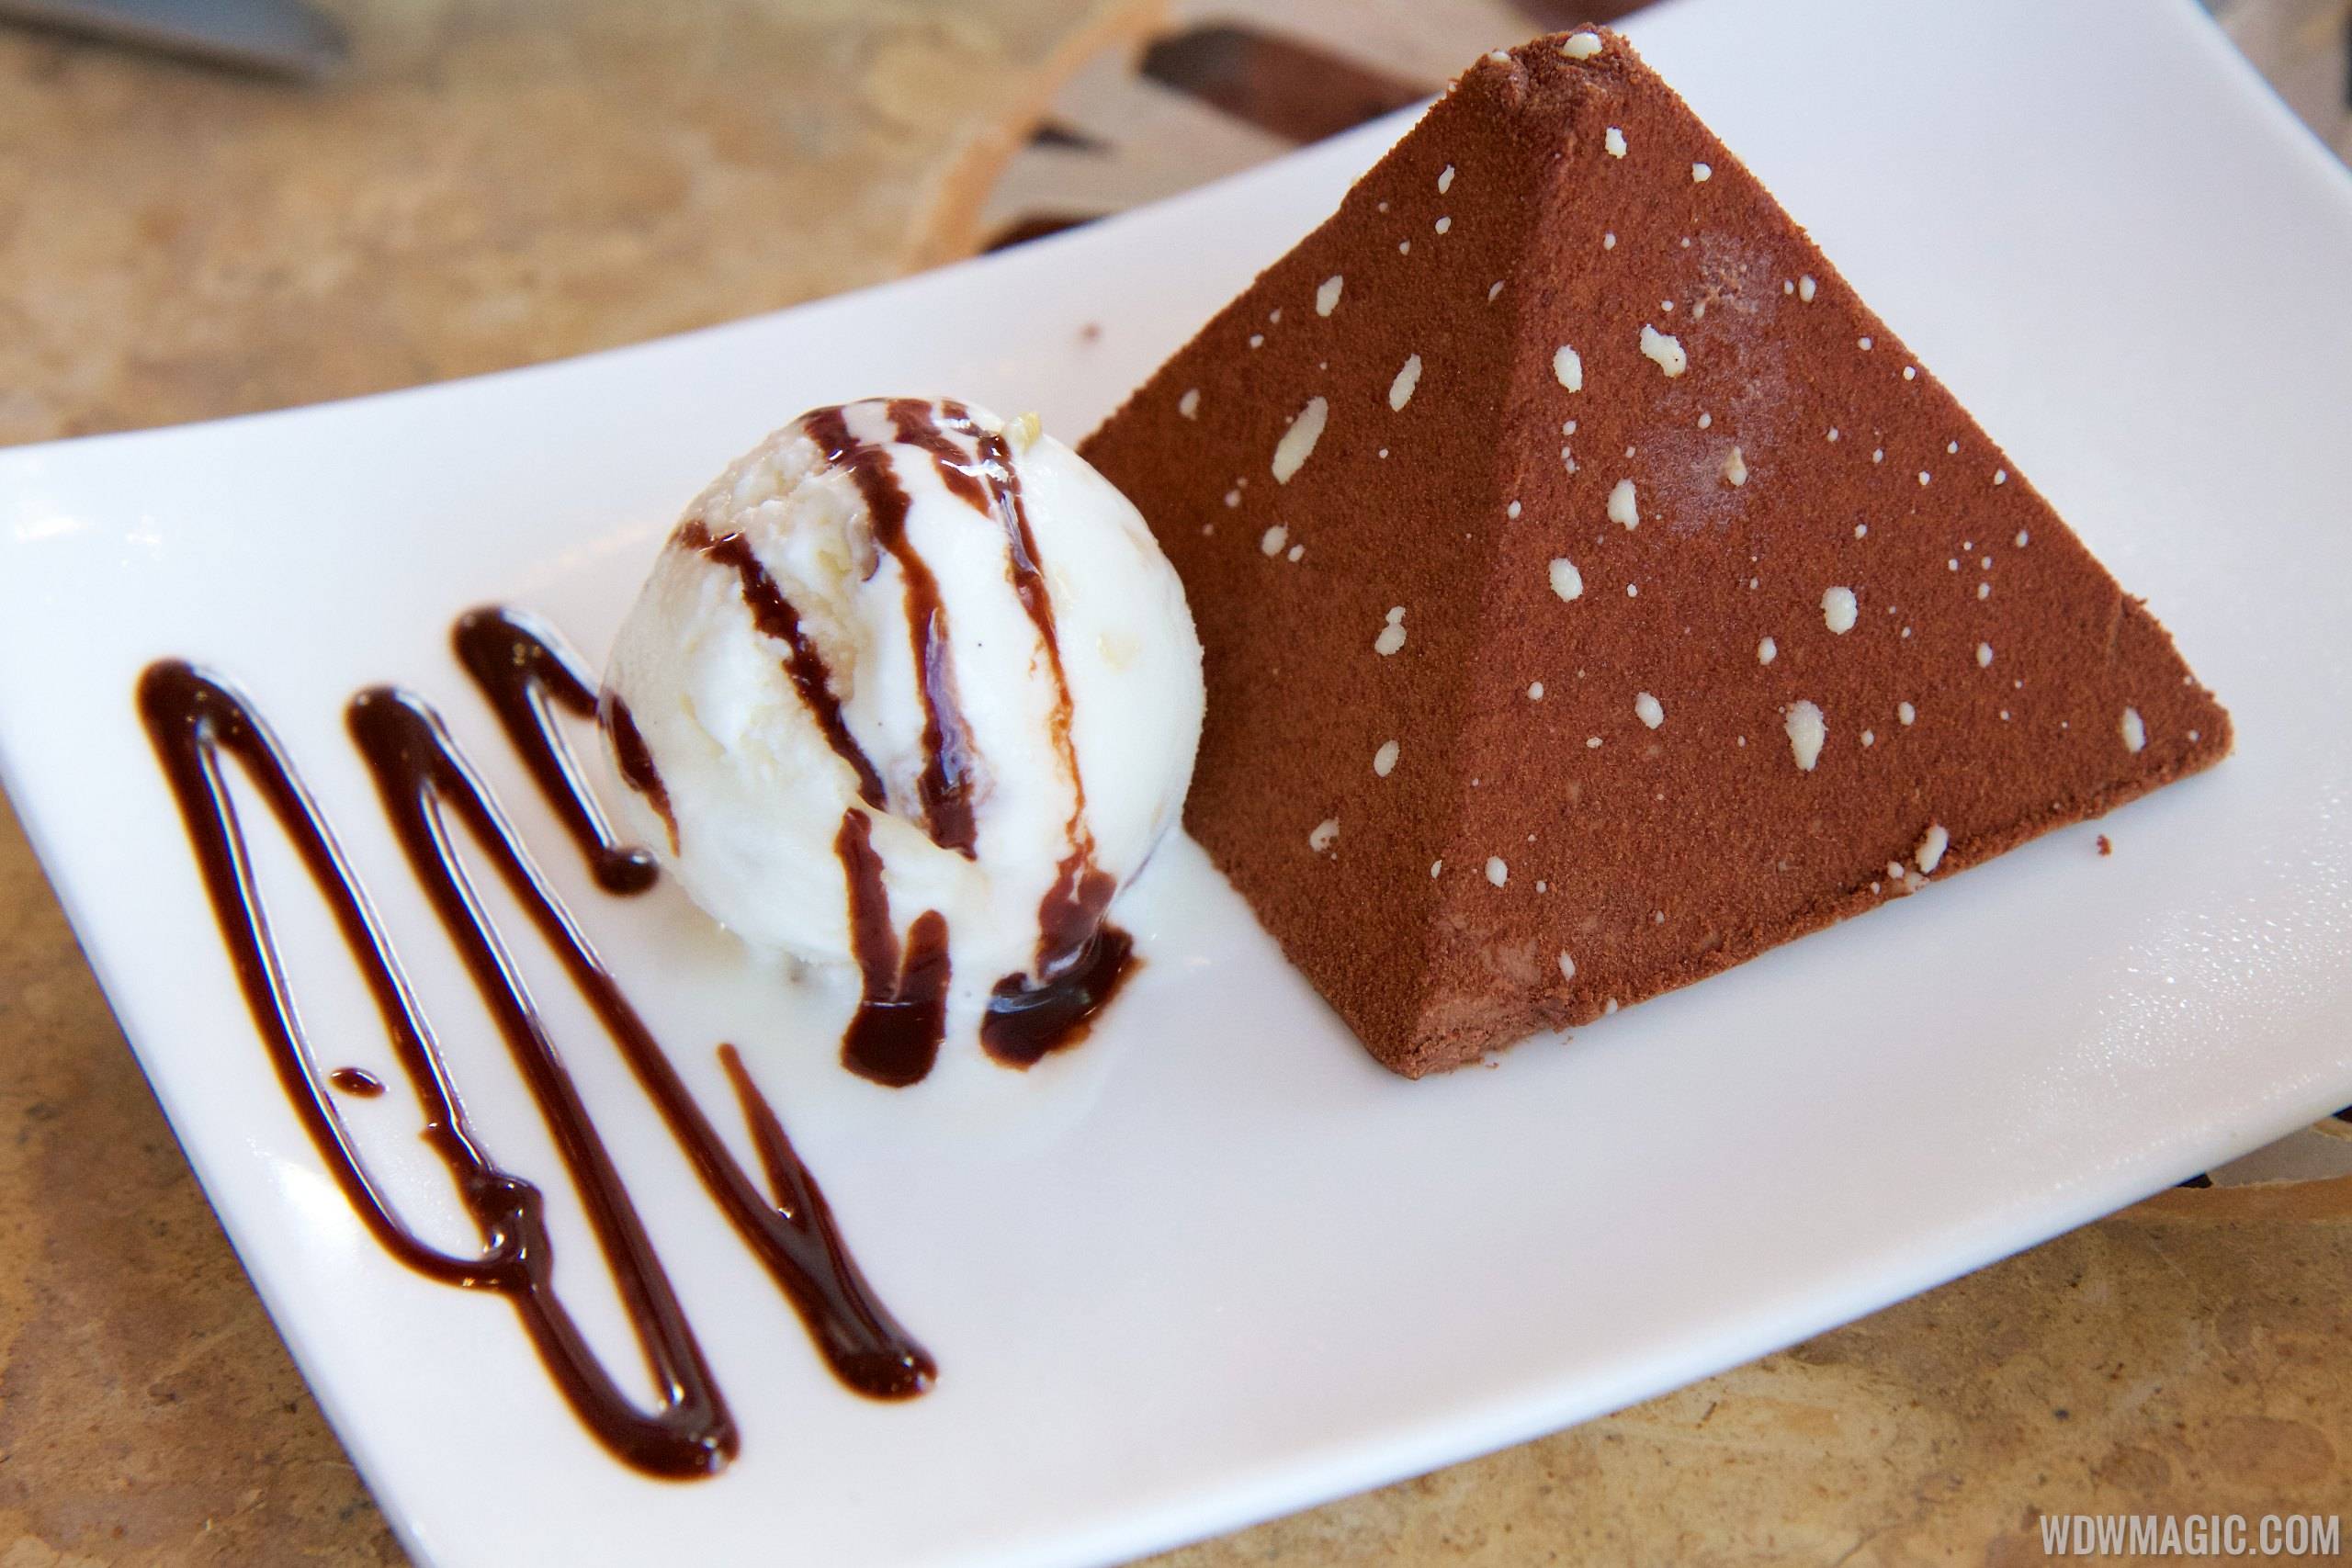 Spice Road Table - Chocolate Pyramid with almond ice cream $7